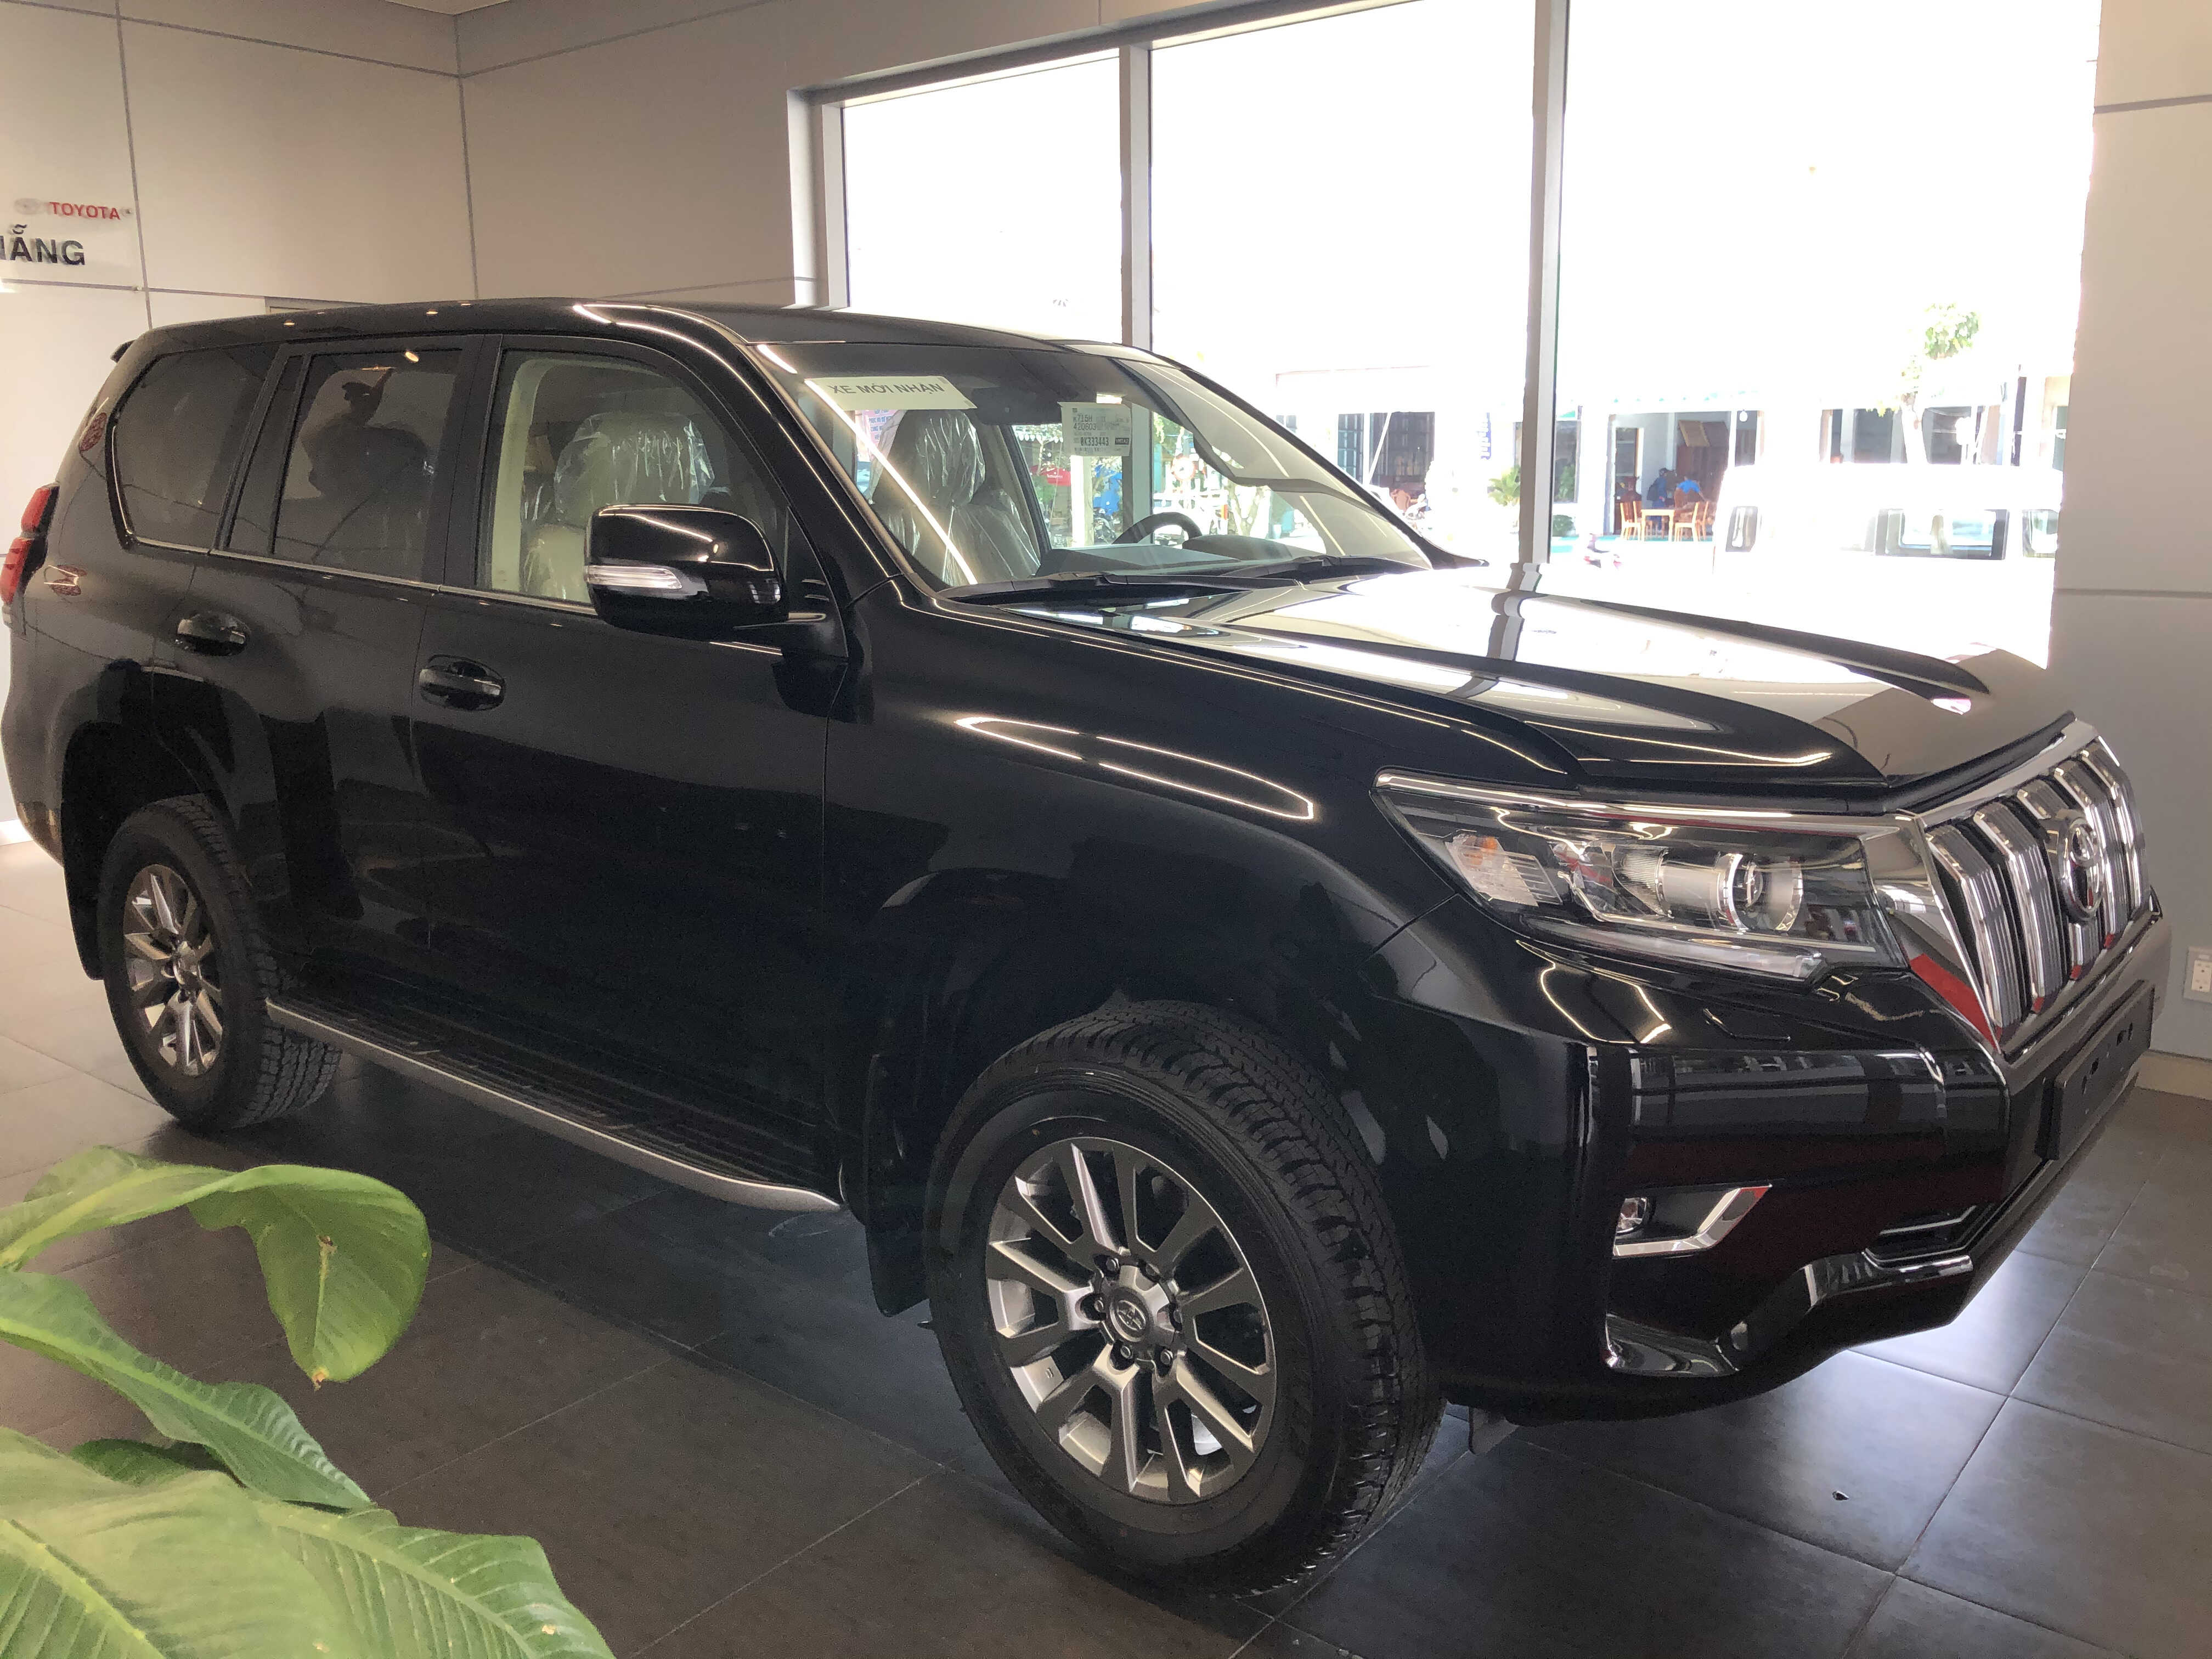 With an impressive appearance, modern interior, and comfort, the price of a toyota prado is quite high